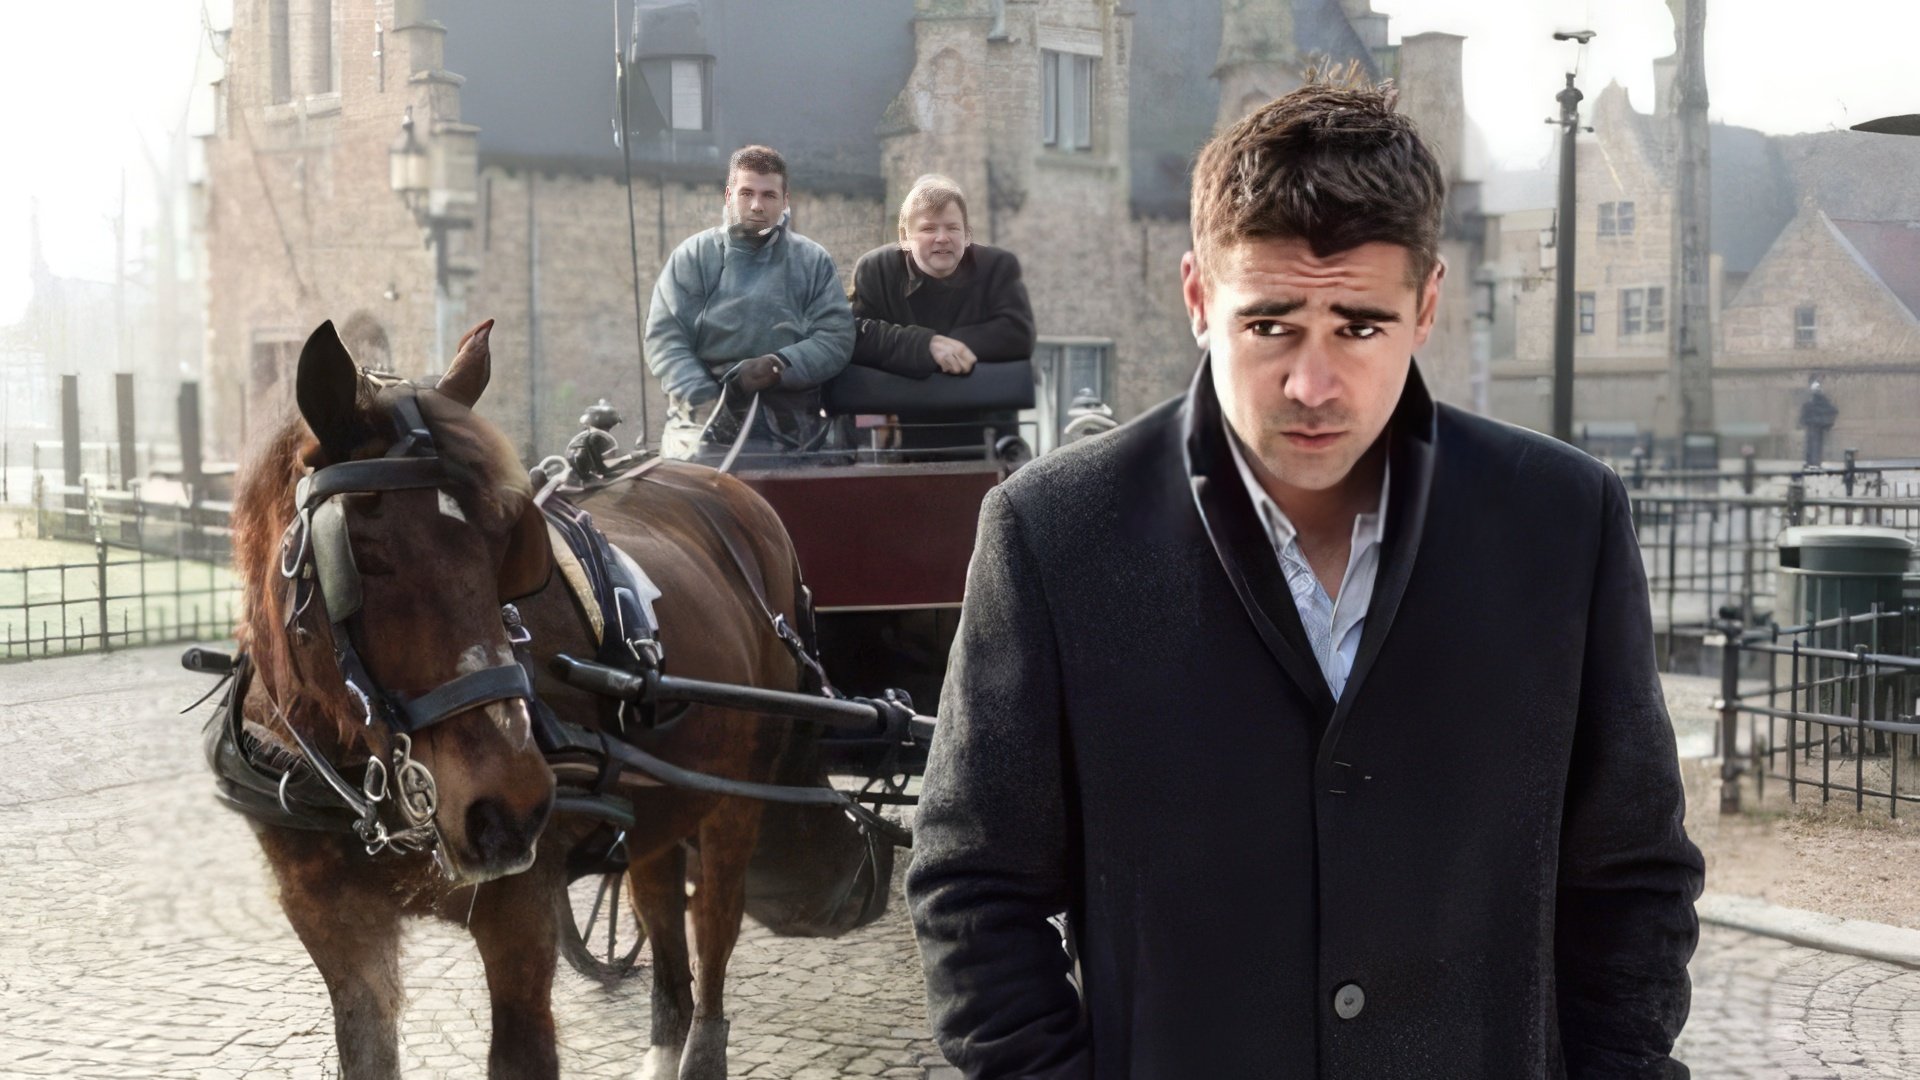 »In Bruges» Colin Farrell was awarded a Golden Globe